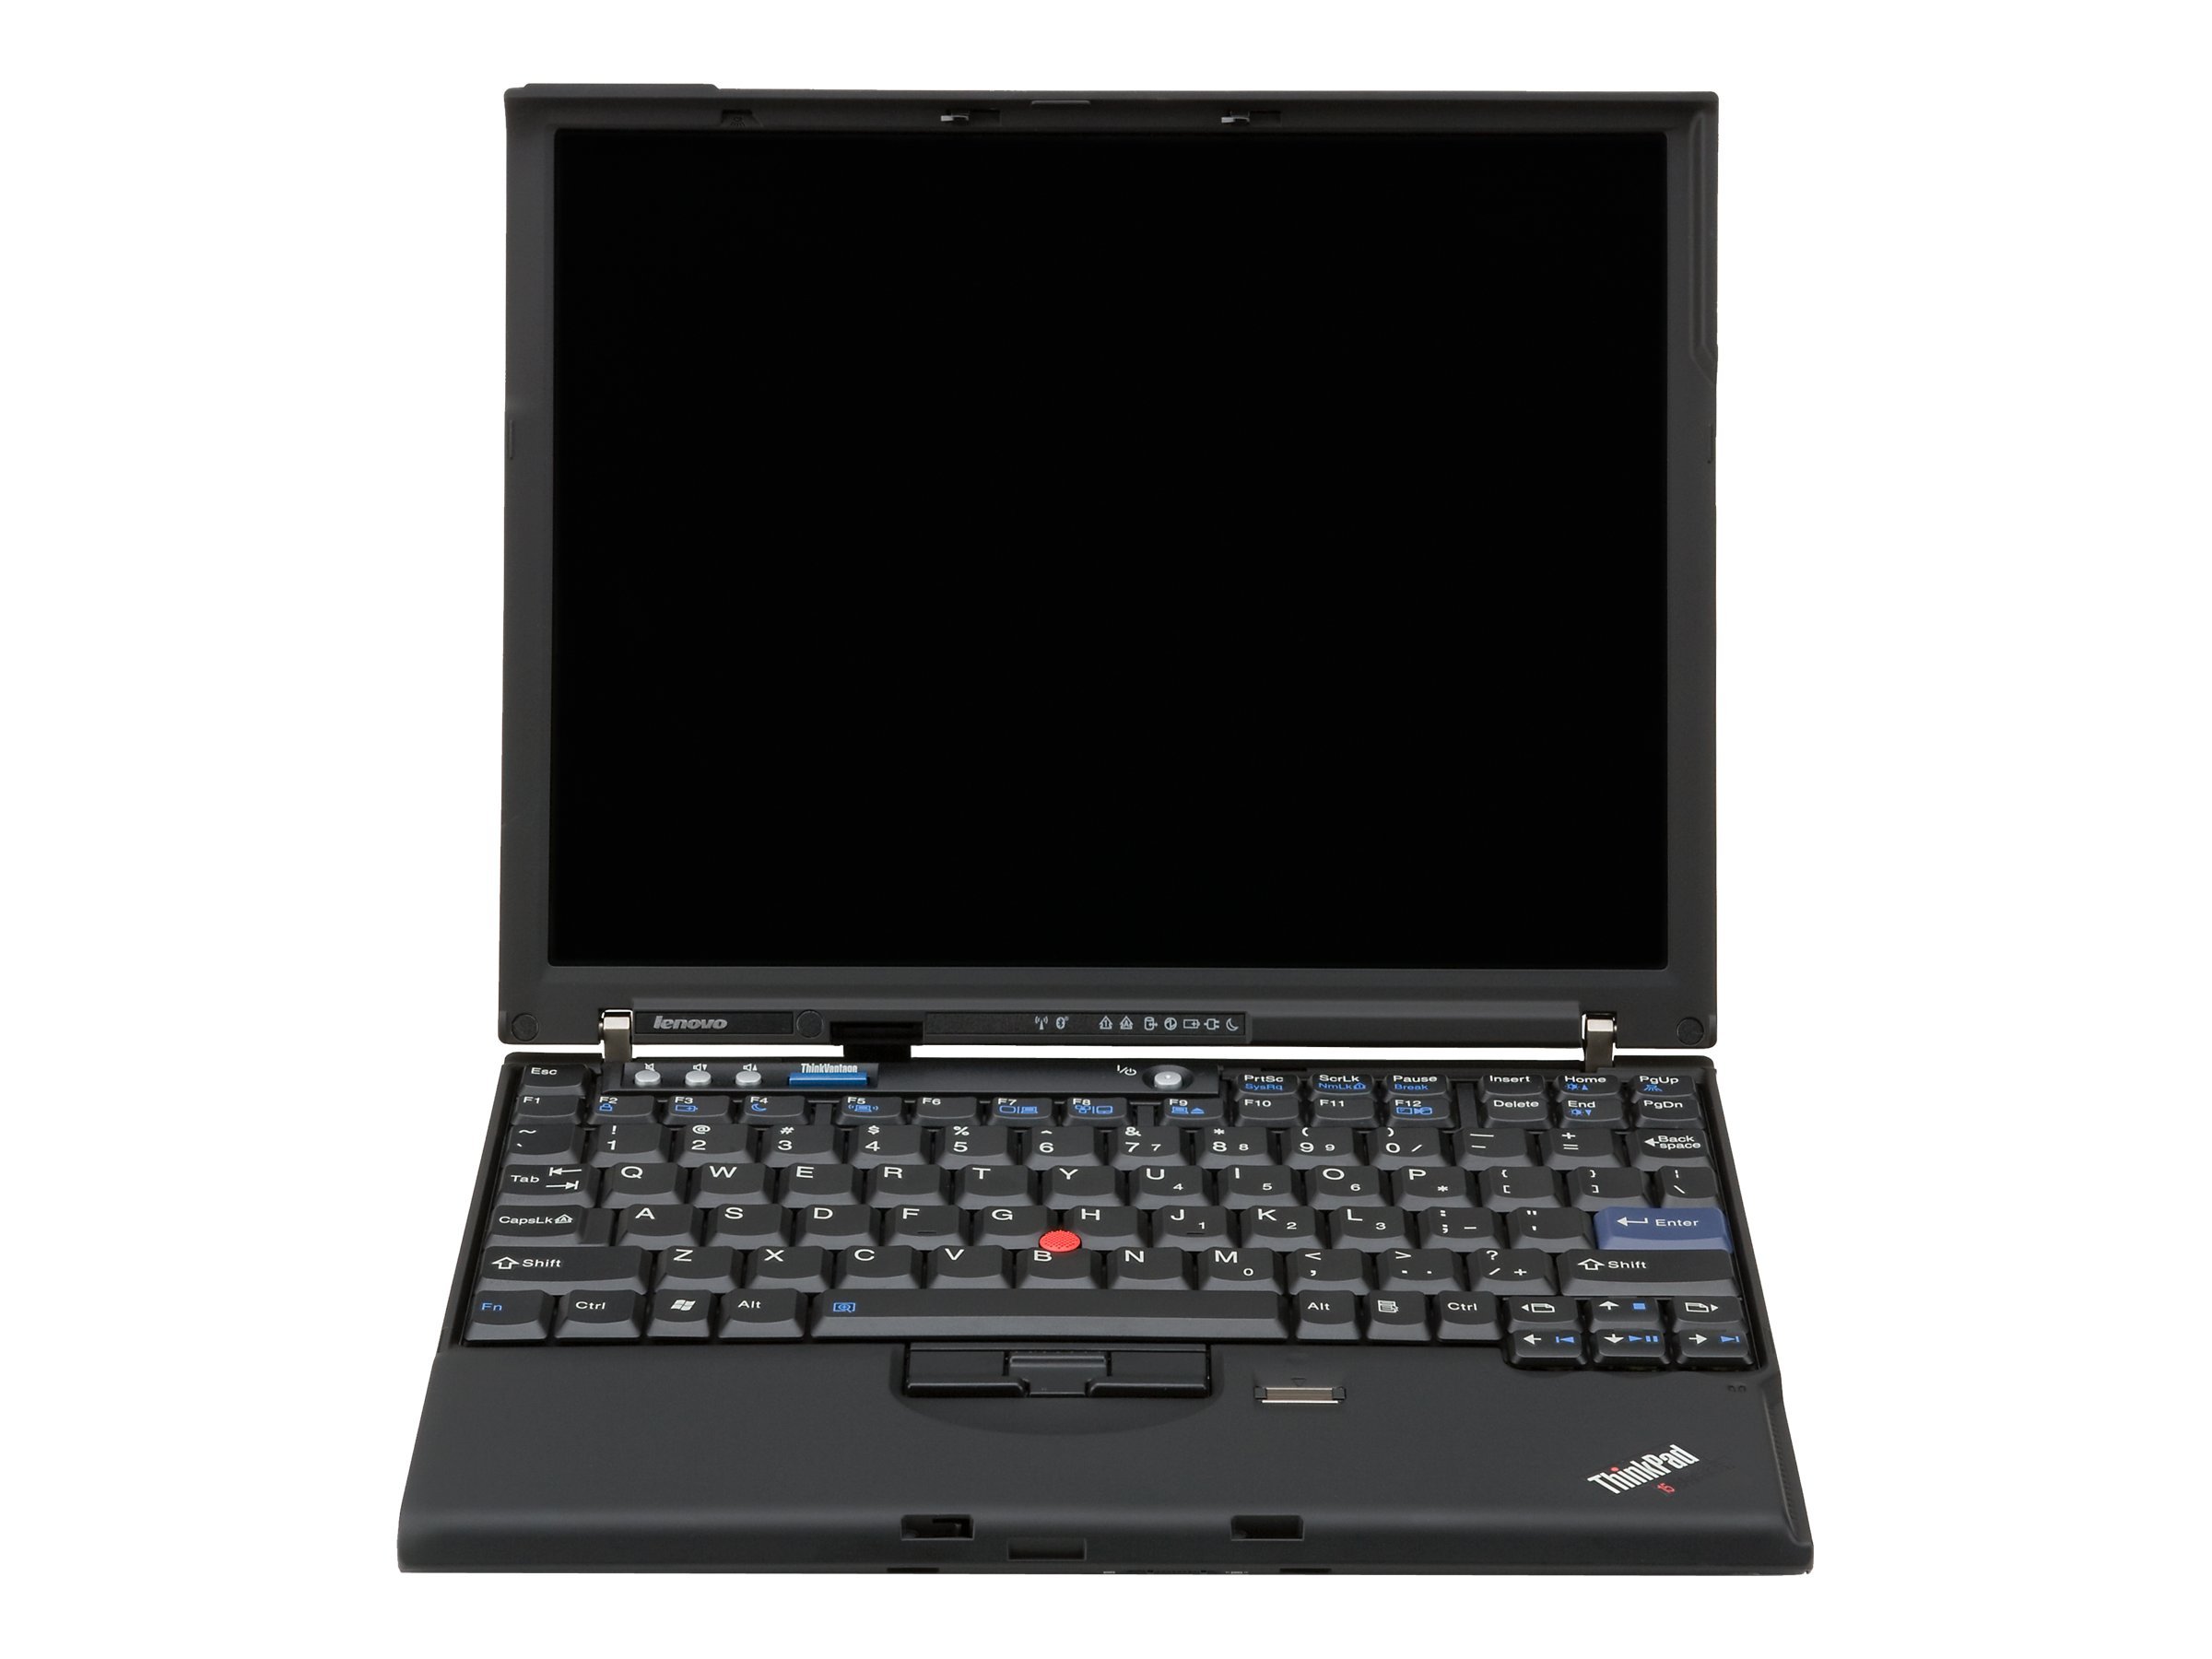 Phobia Lyrical Monumental Lenovo ThinkPad X61s (7667) - full specs, details and review